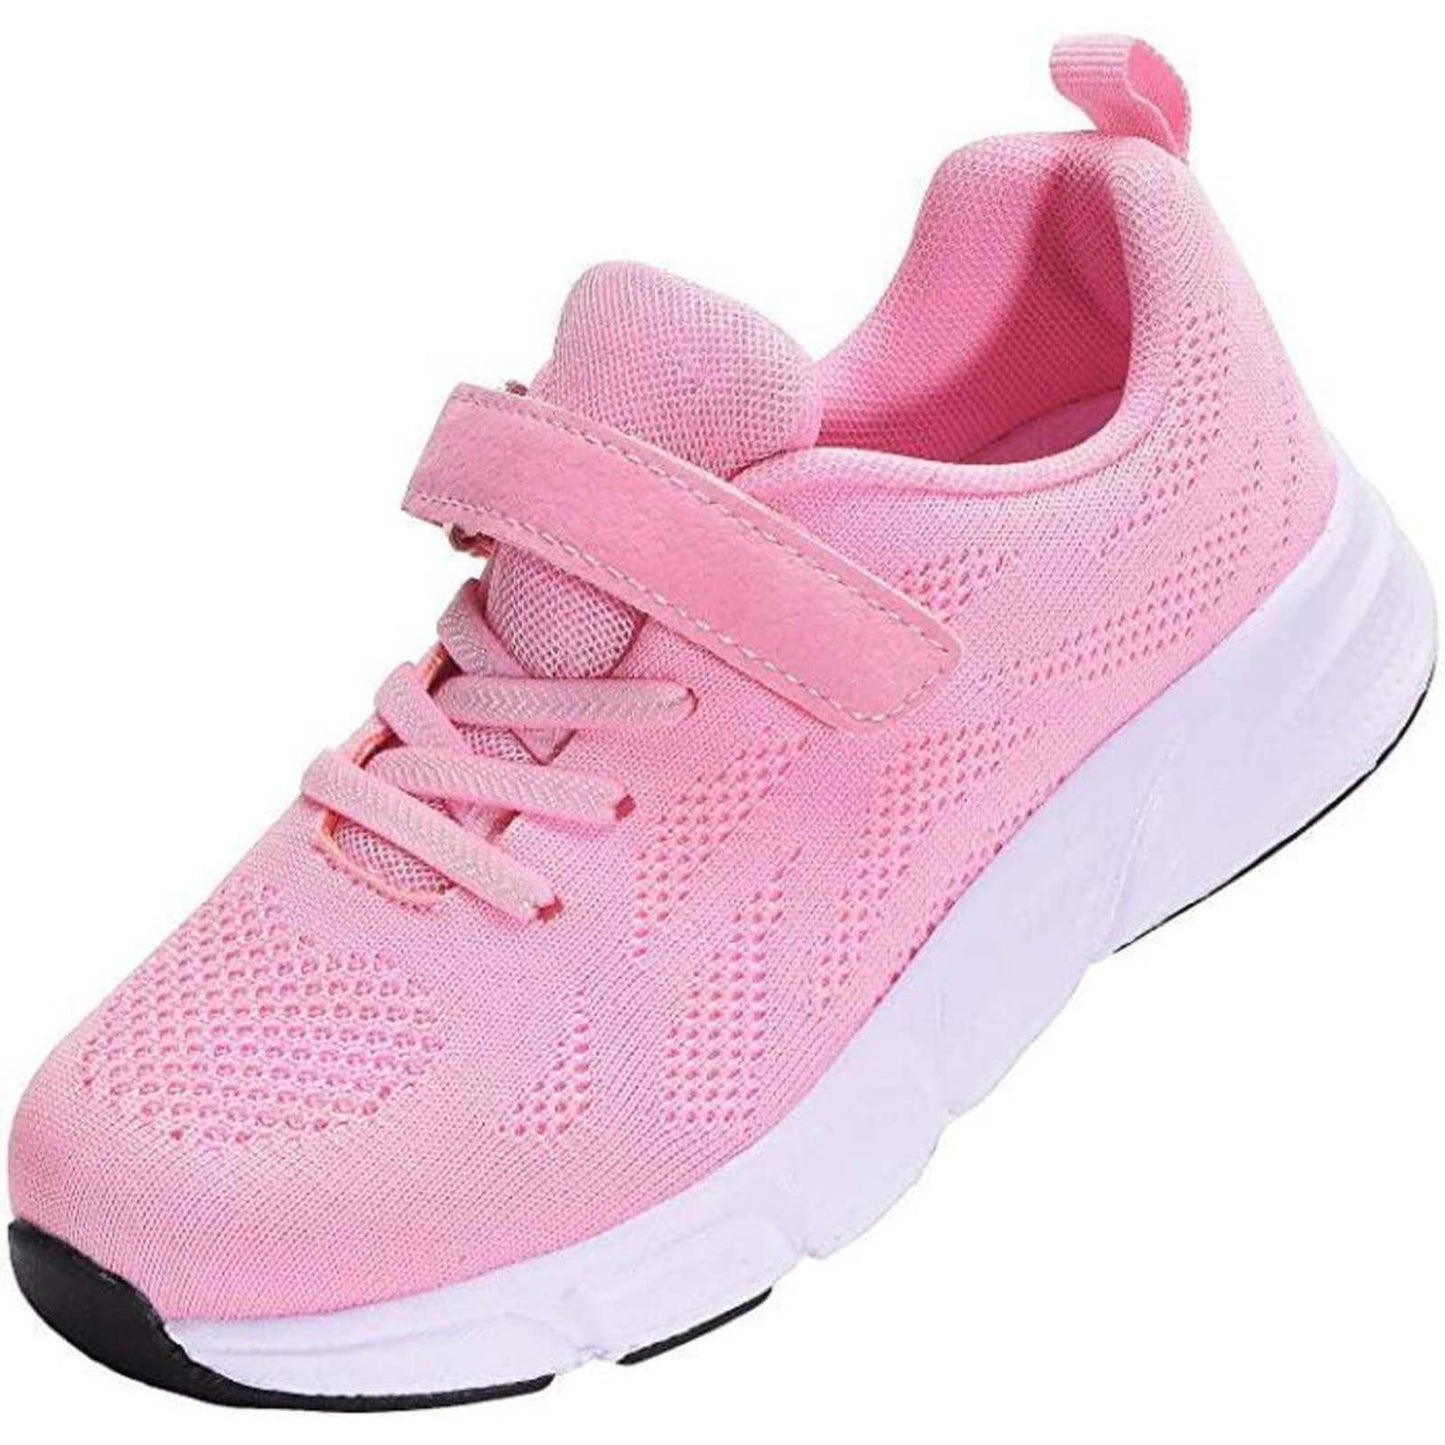 KVbabby Trainers children's sports shoes breathable trainers EU 30 / 12 US